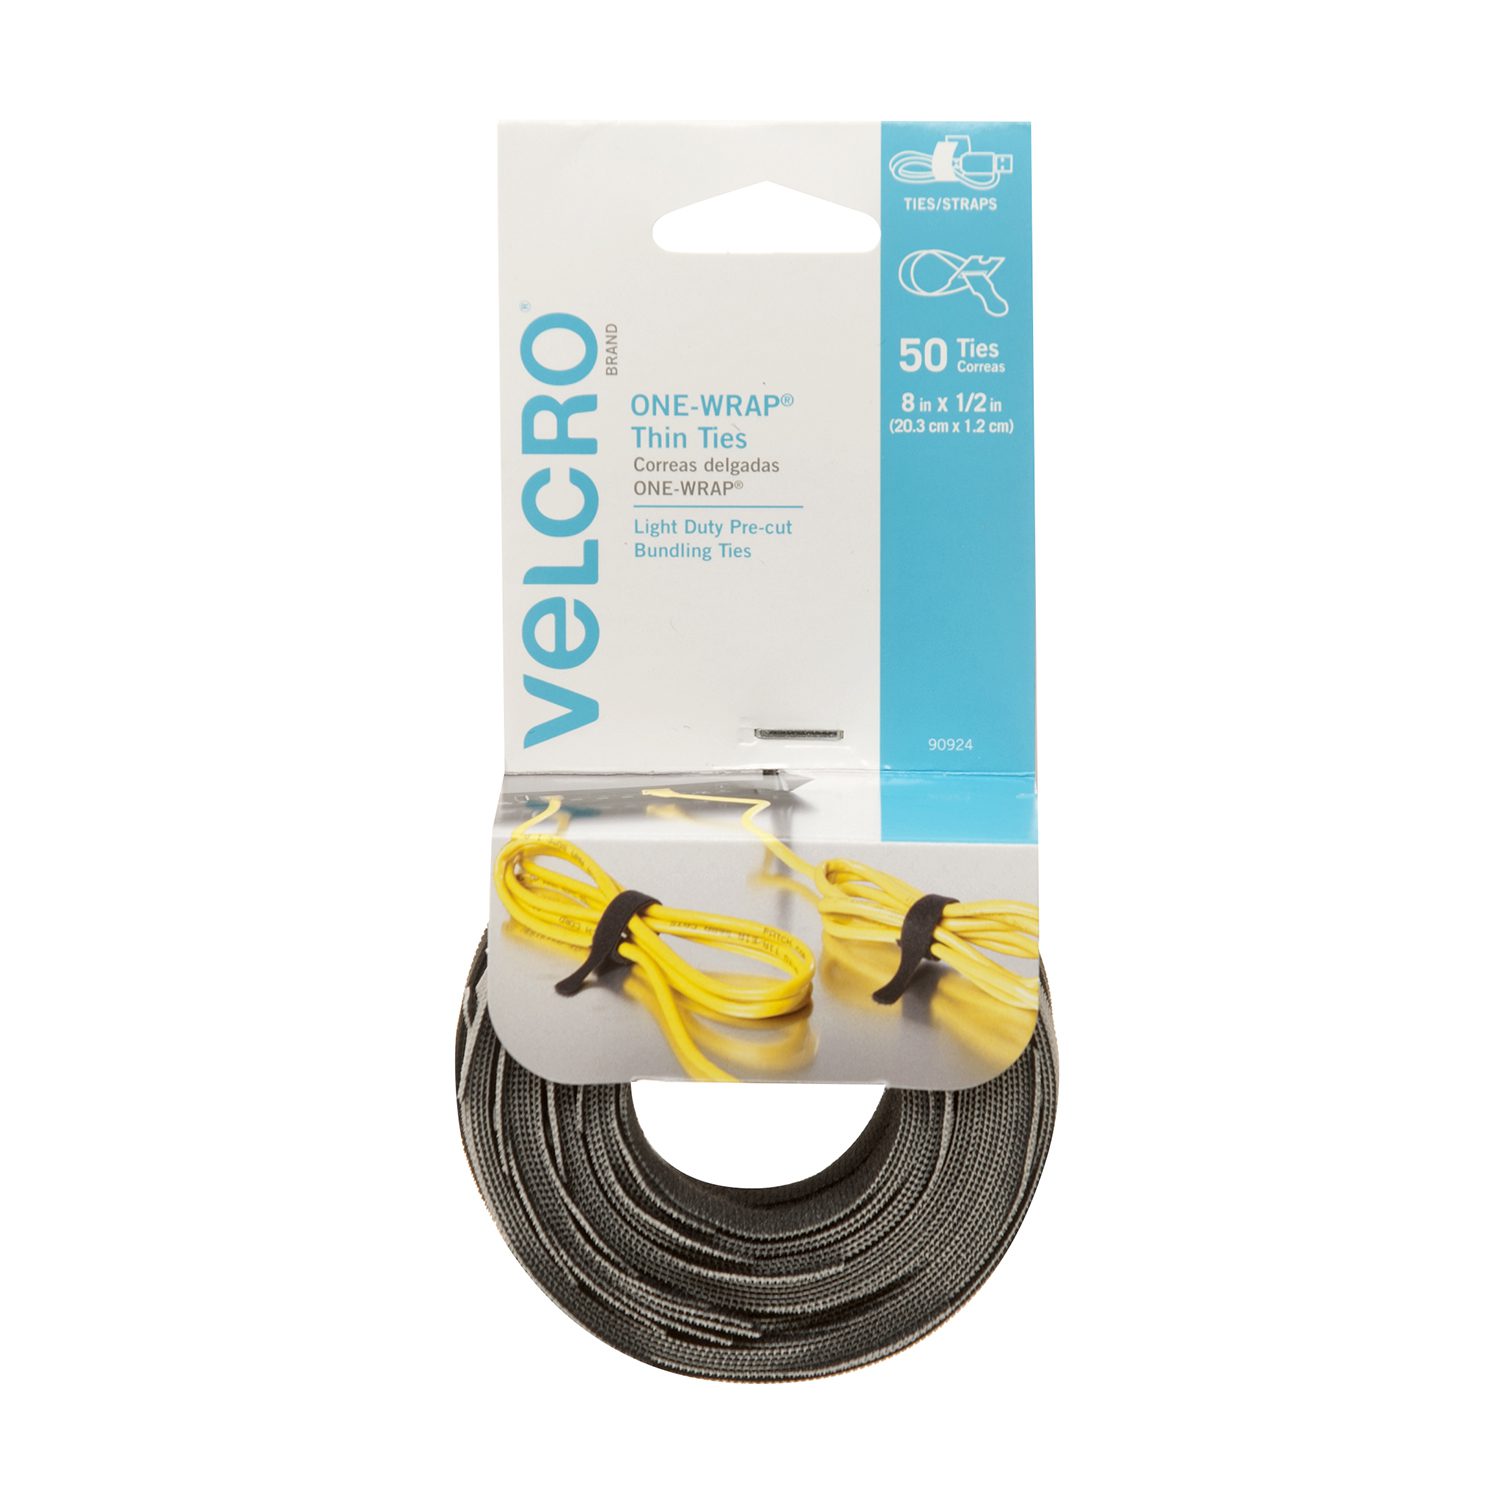 VELCRO Brand ONE-WRAP Cable Ties - Maisam Trading LLC